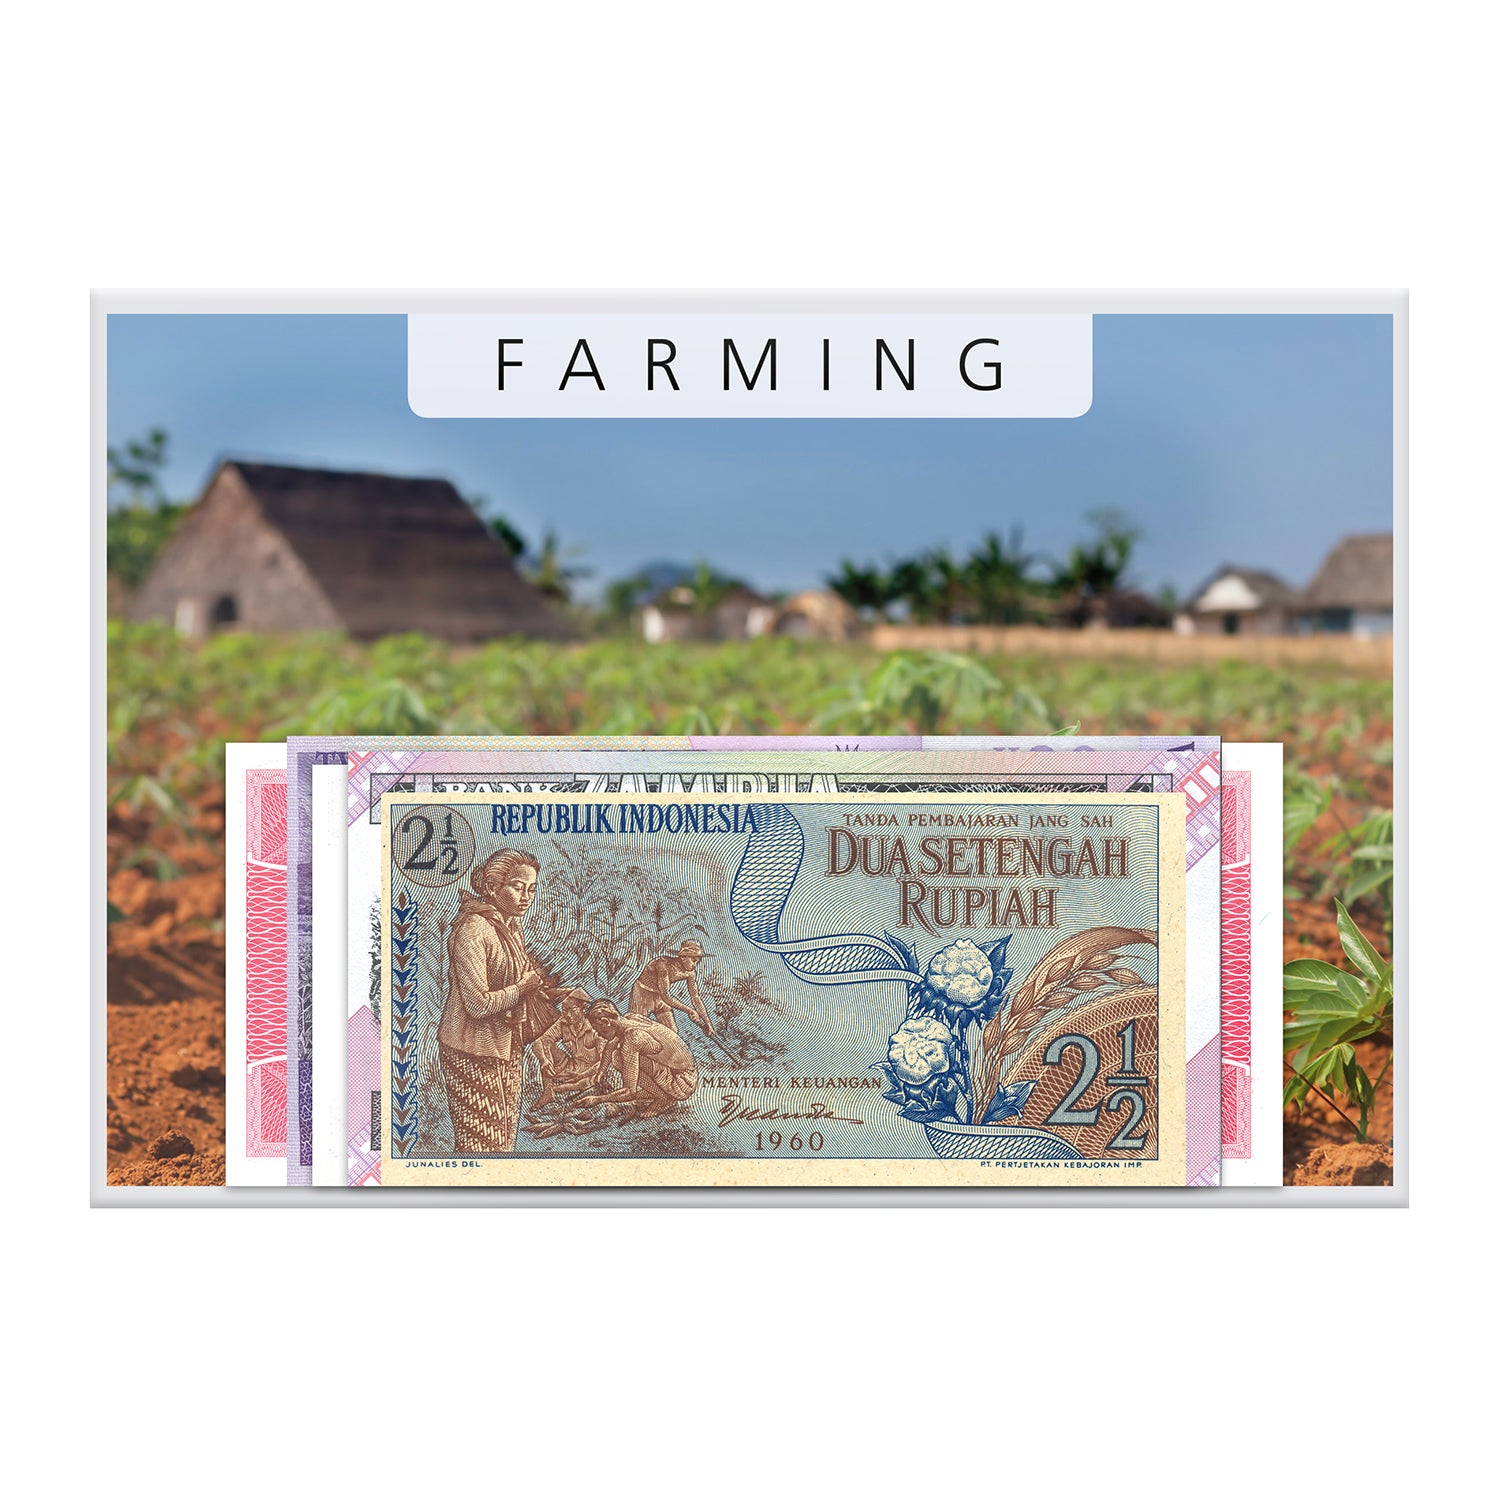 Banknote Collection "Farming"